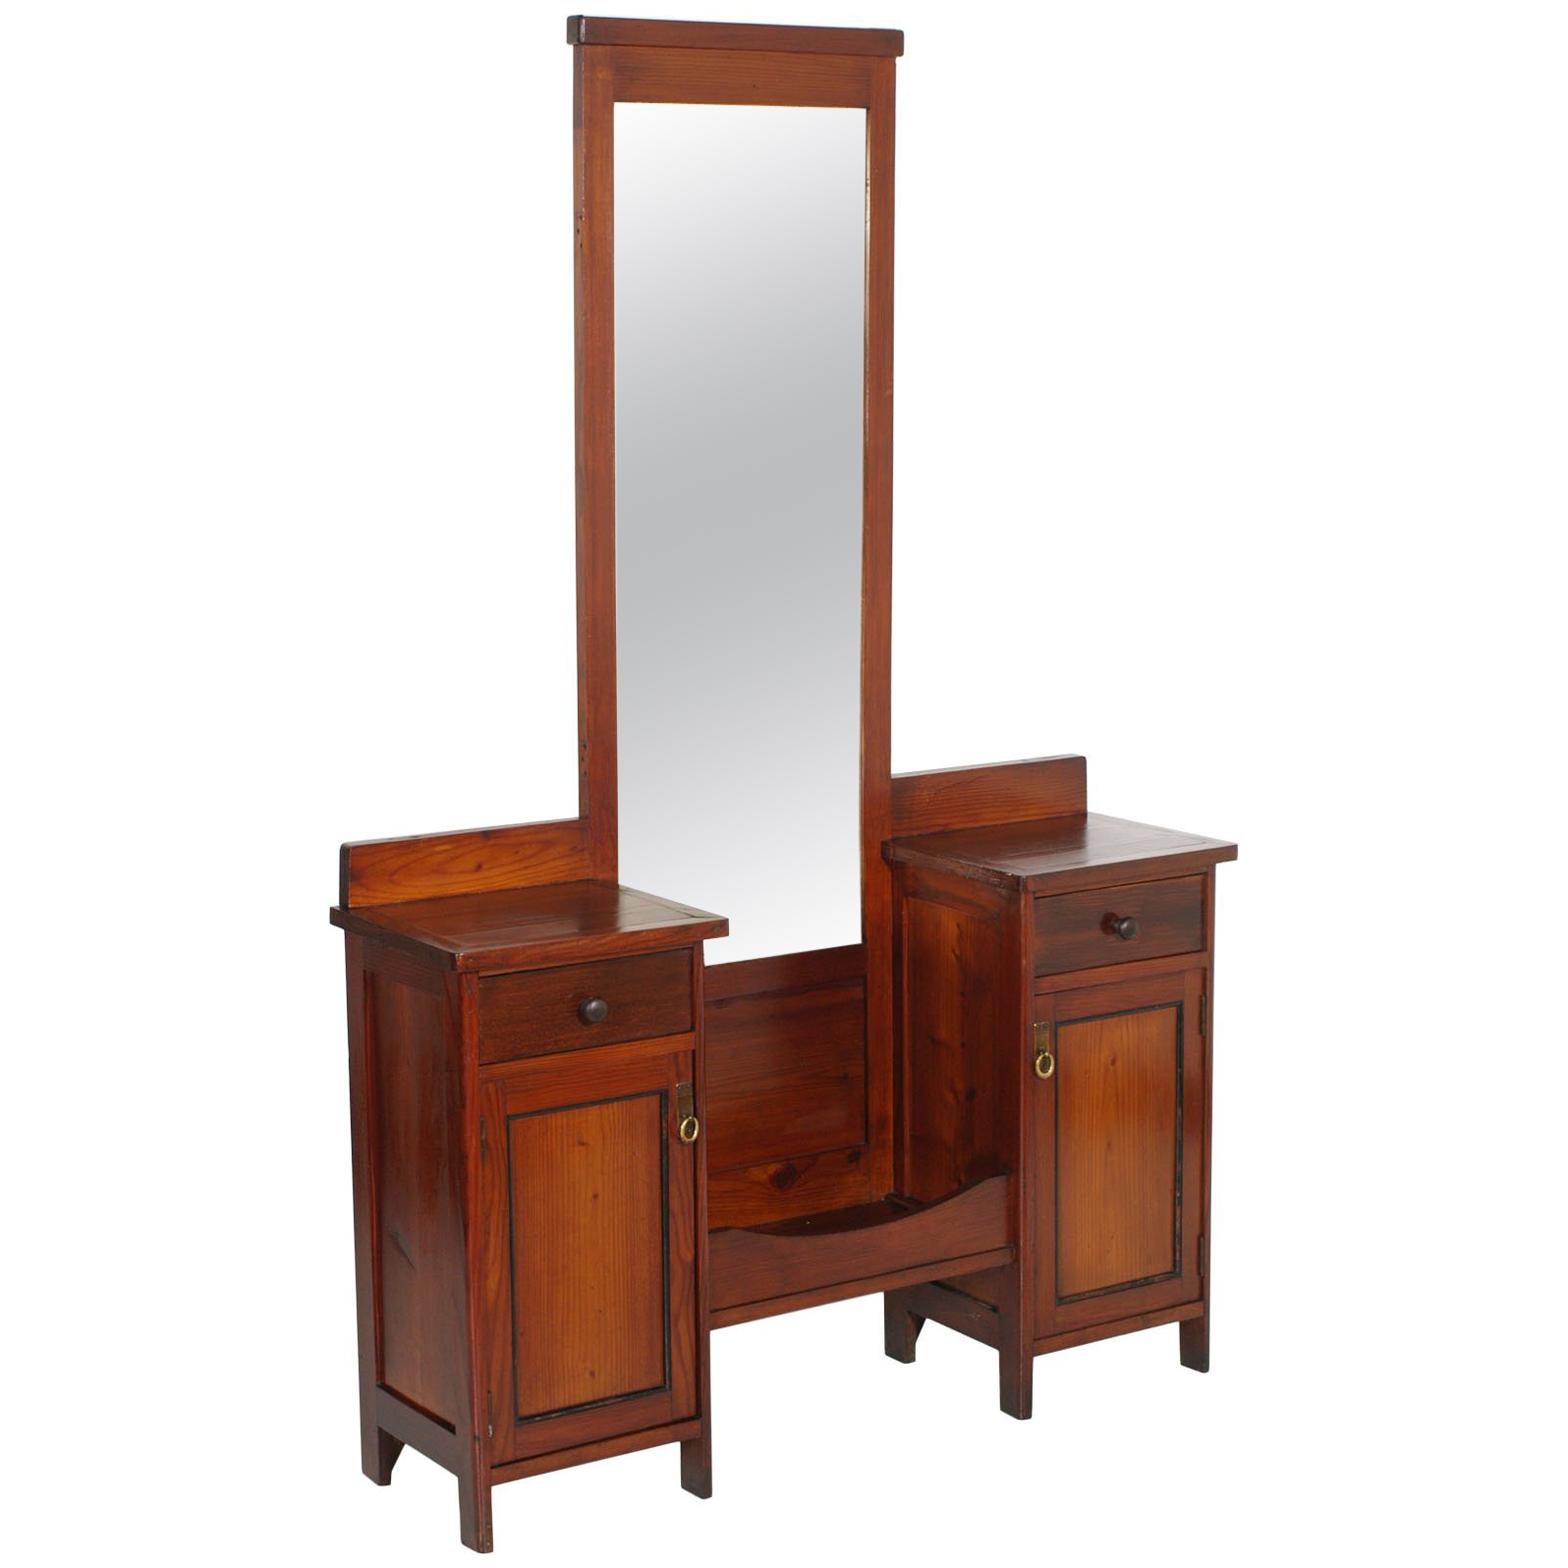 Antique Country Vanity, Entry Mirror with Cabinets, Pine , Wax Polished